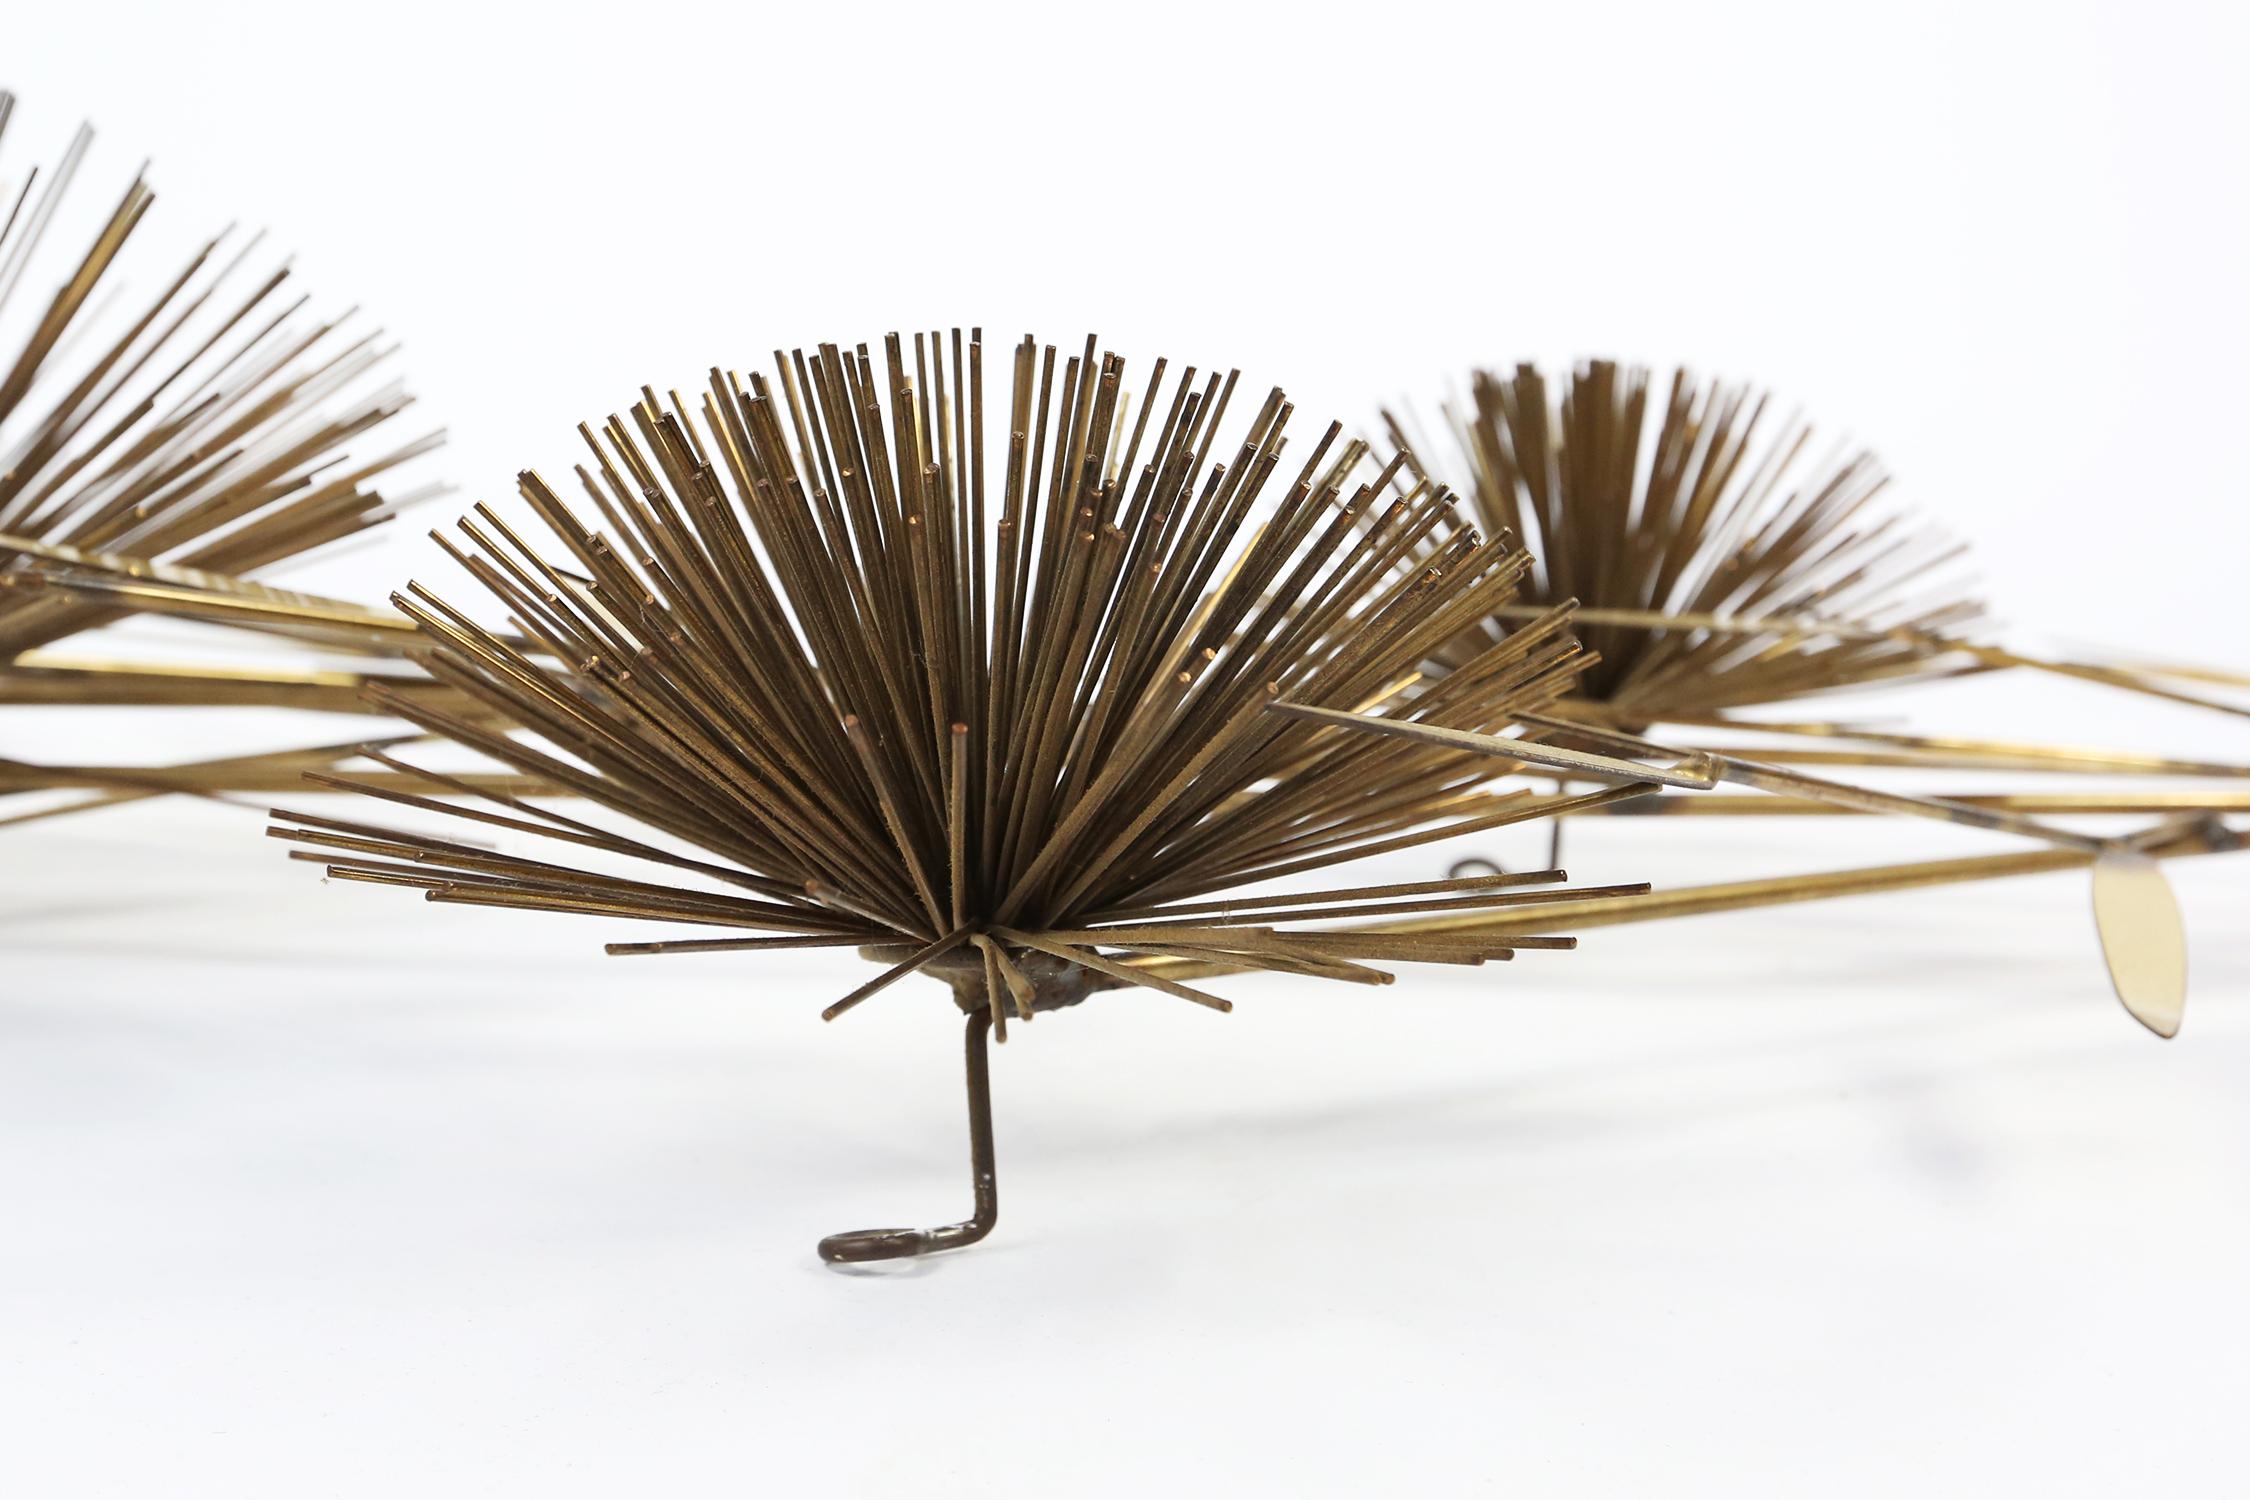 Late 20th Century Mid-Century Modern Gold Brass Pom Pom Wall Sculpture by Curtis Jere, 1979